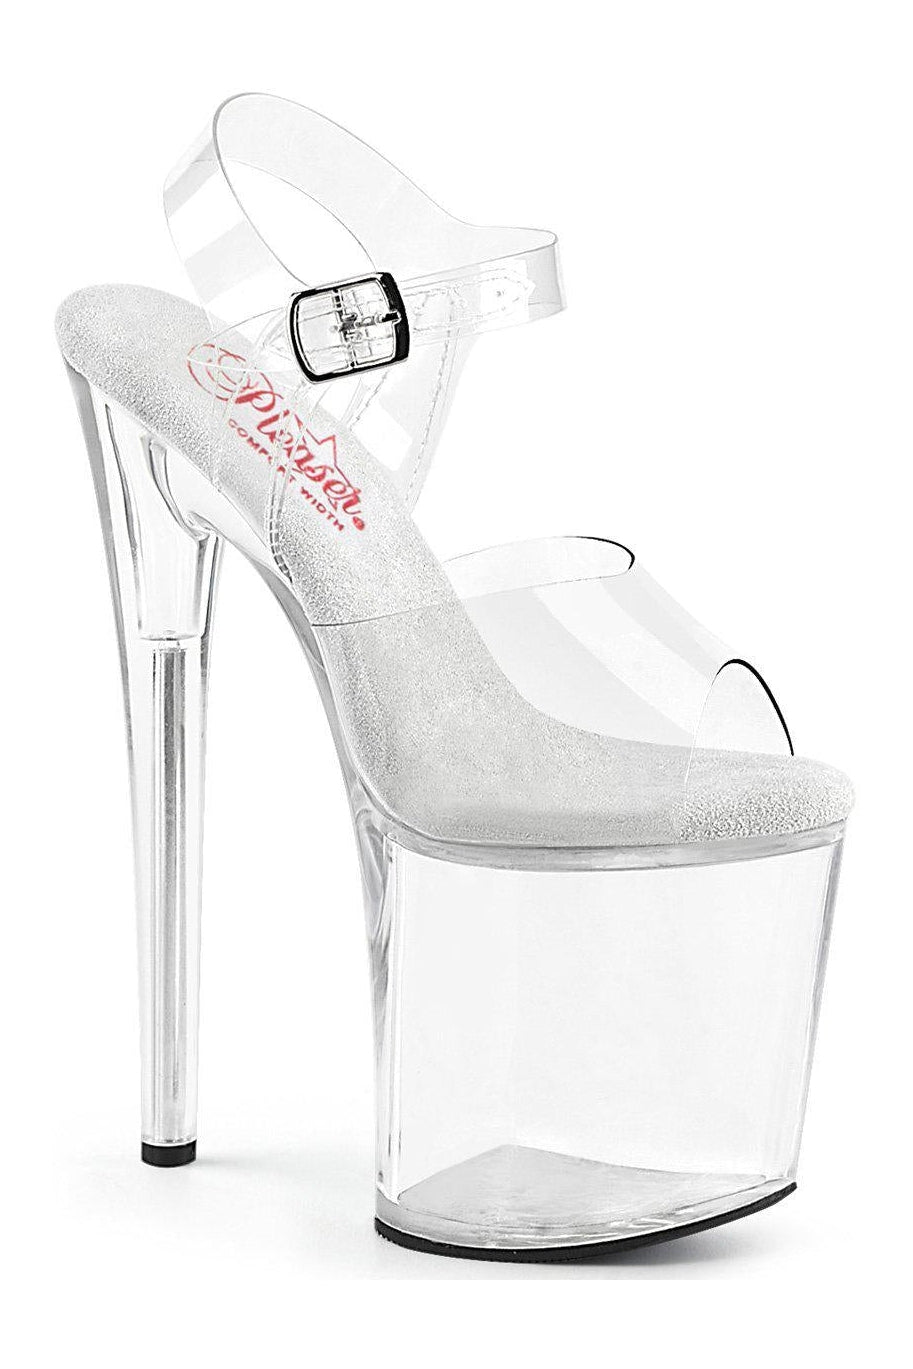 NAUGHTY-808 Sandal | Clear Vinyl-Sandals-Pleaser-Clear-6-Vinyl-SEXYSHOES.COM